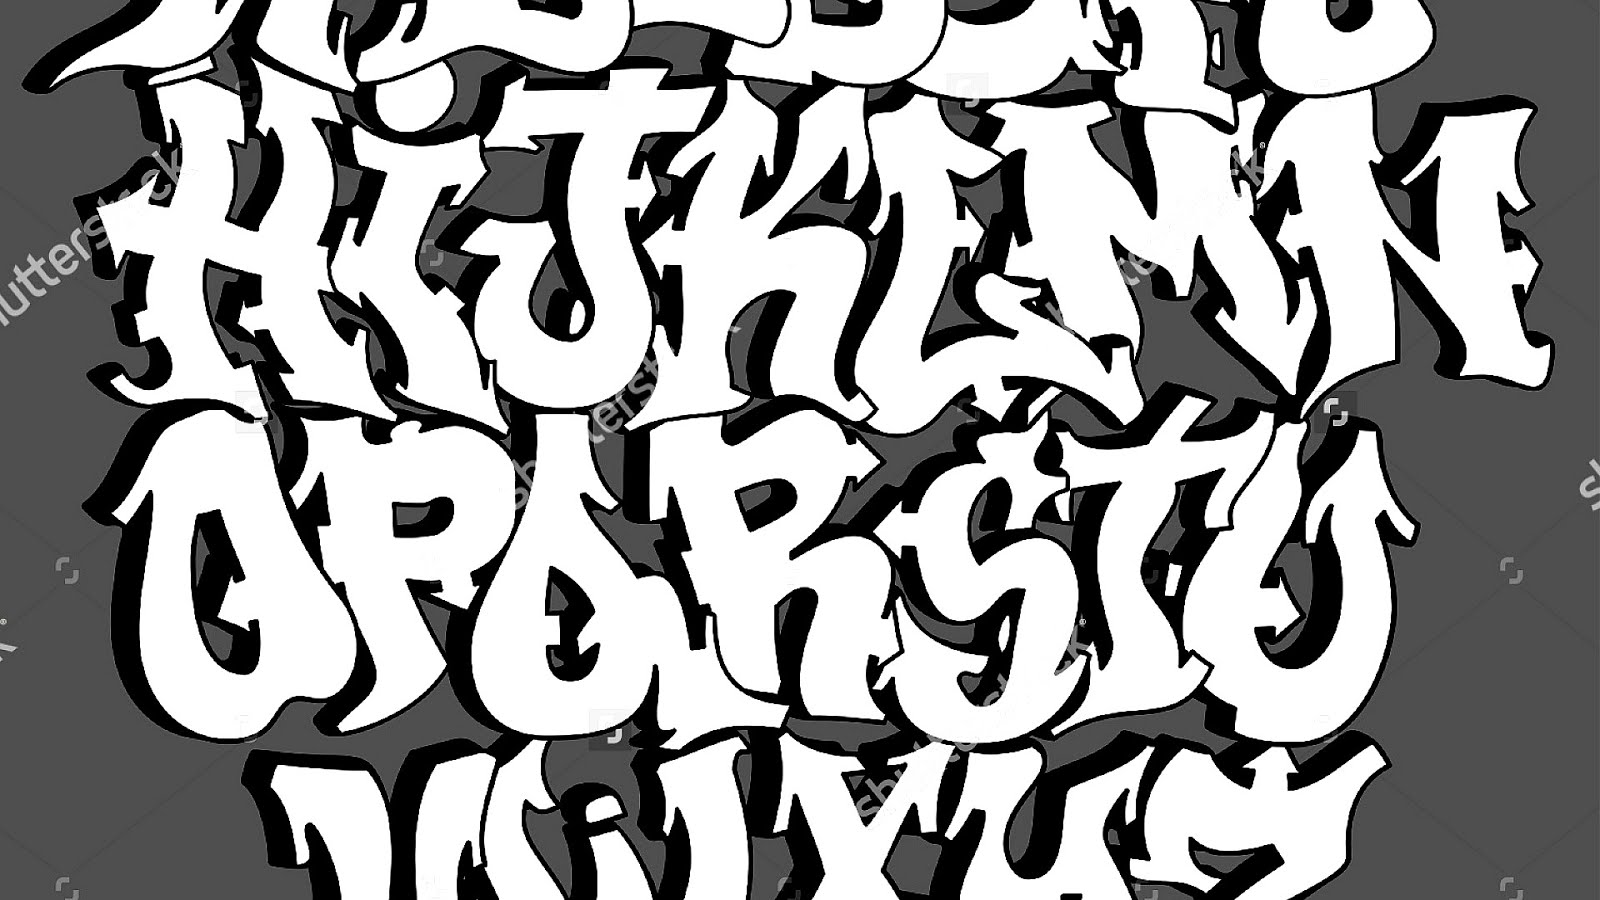 Calligraphy - Calligraphy Graffiti Font - Calligraph Choices